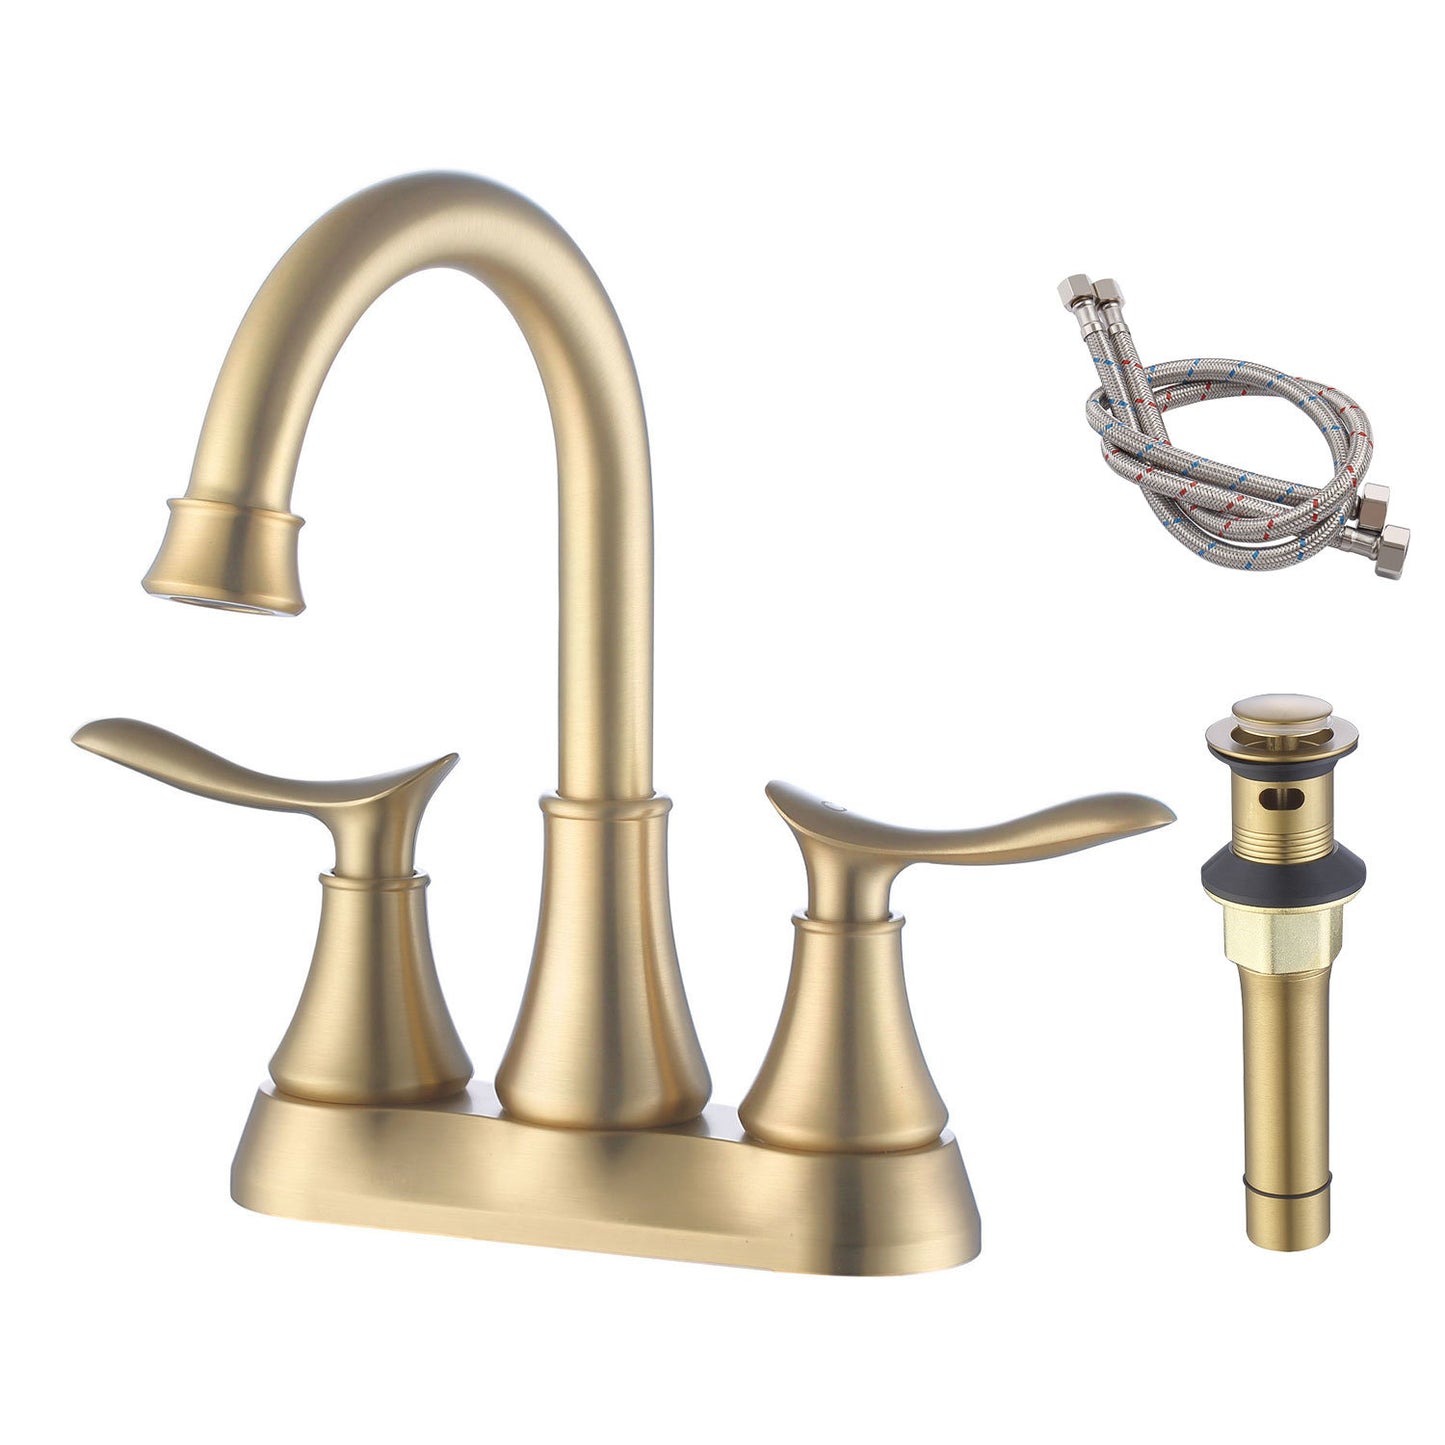 AvaMalis A|M Aquae 2-Handle 4-Inch Brushed Gold Bathroom Faucet, Bathroom Vanity Sink Faucets with Pop-up Drain and Supply Hoses